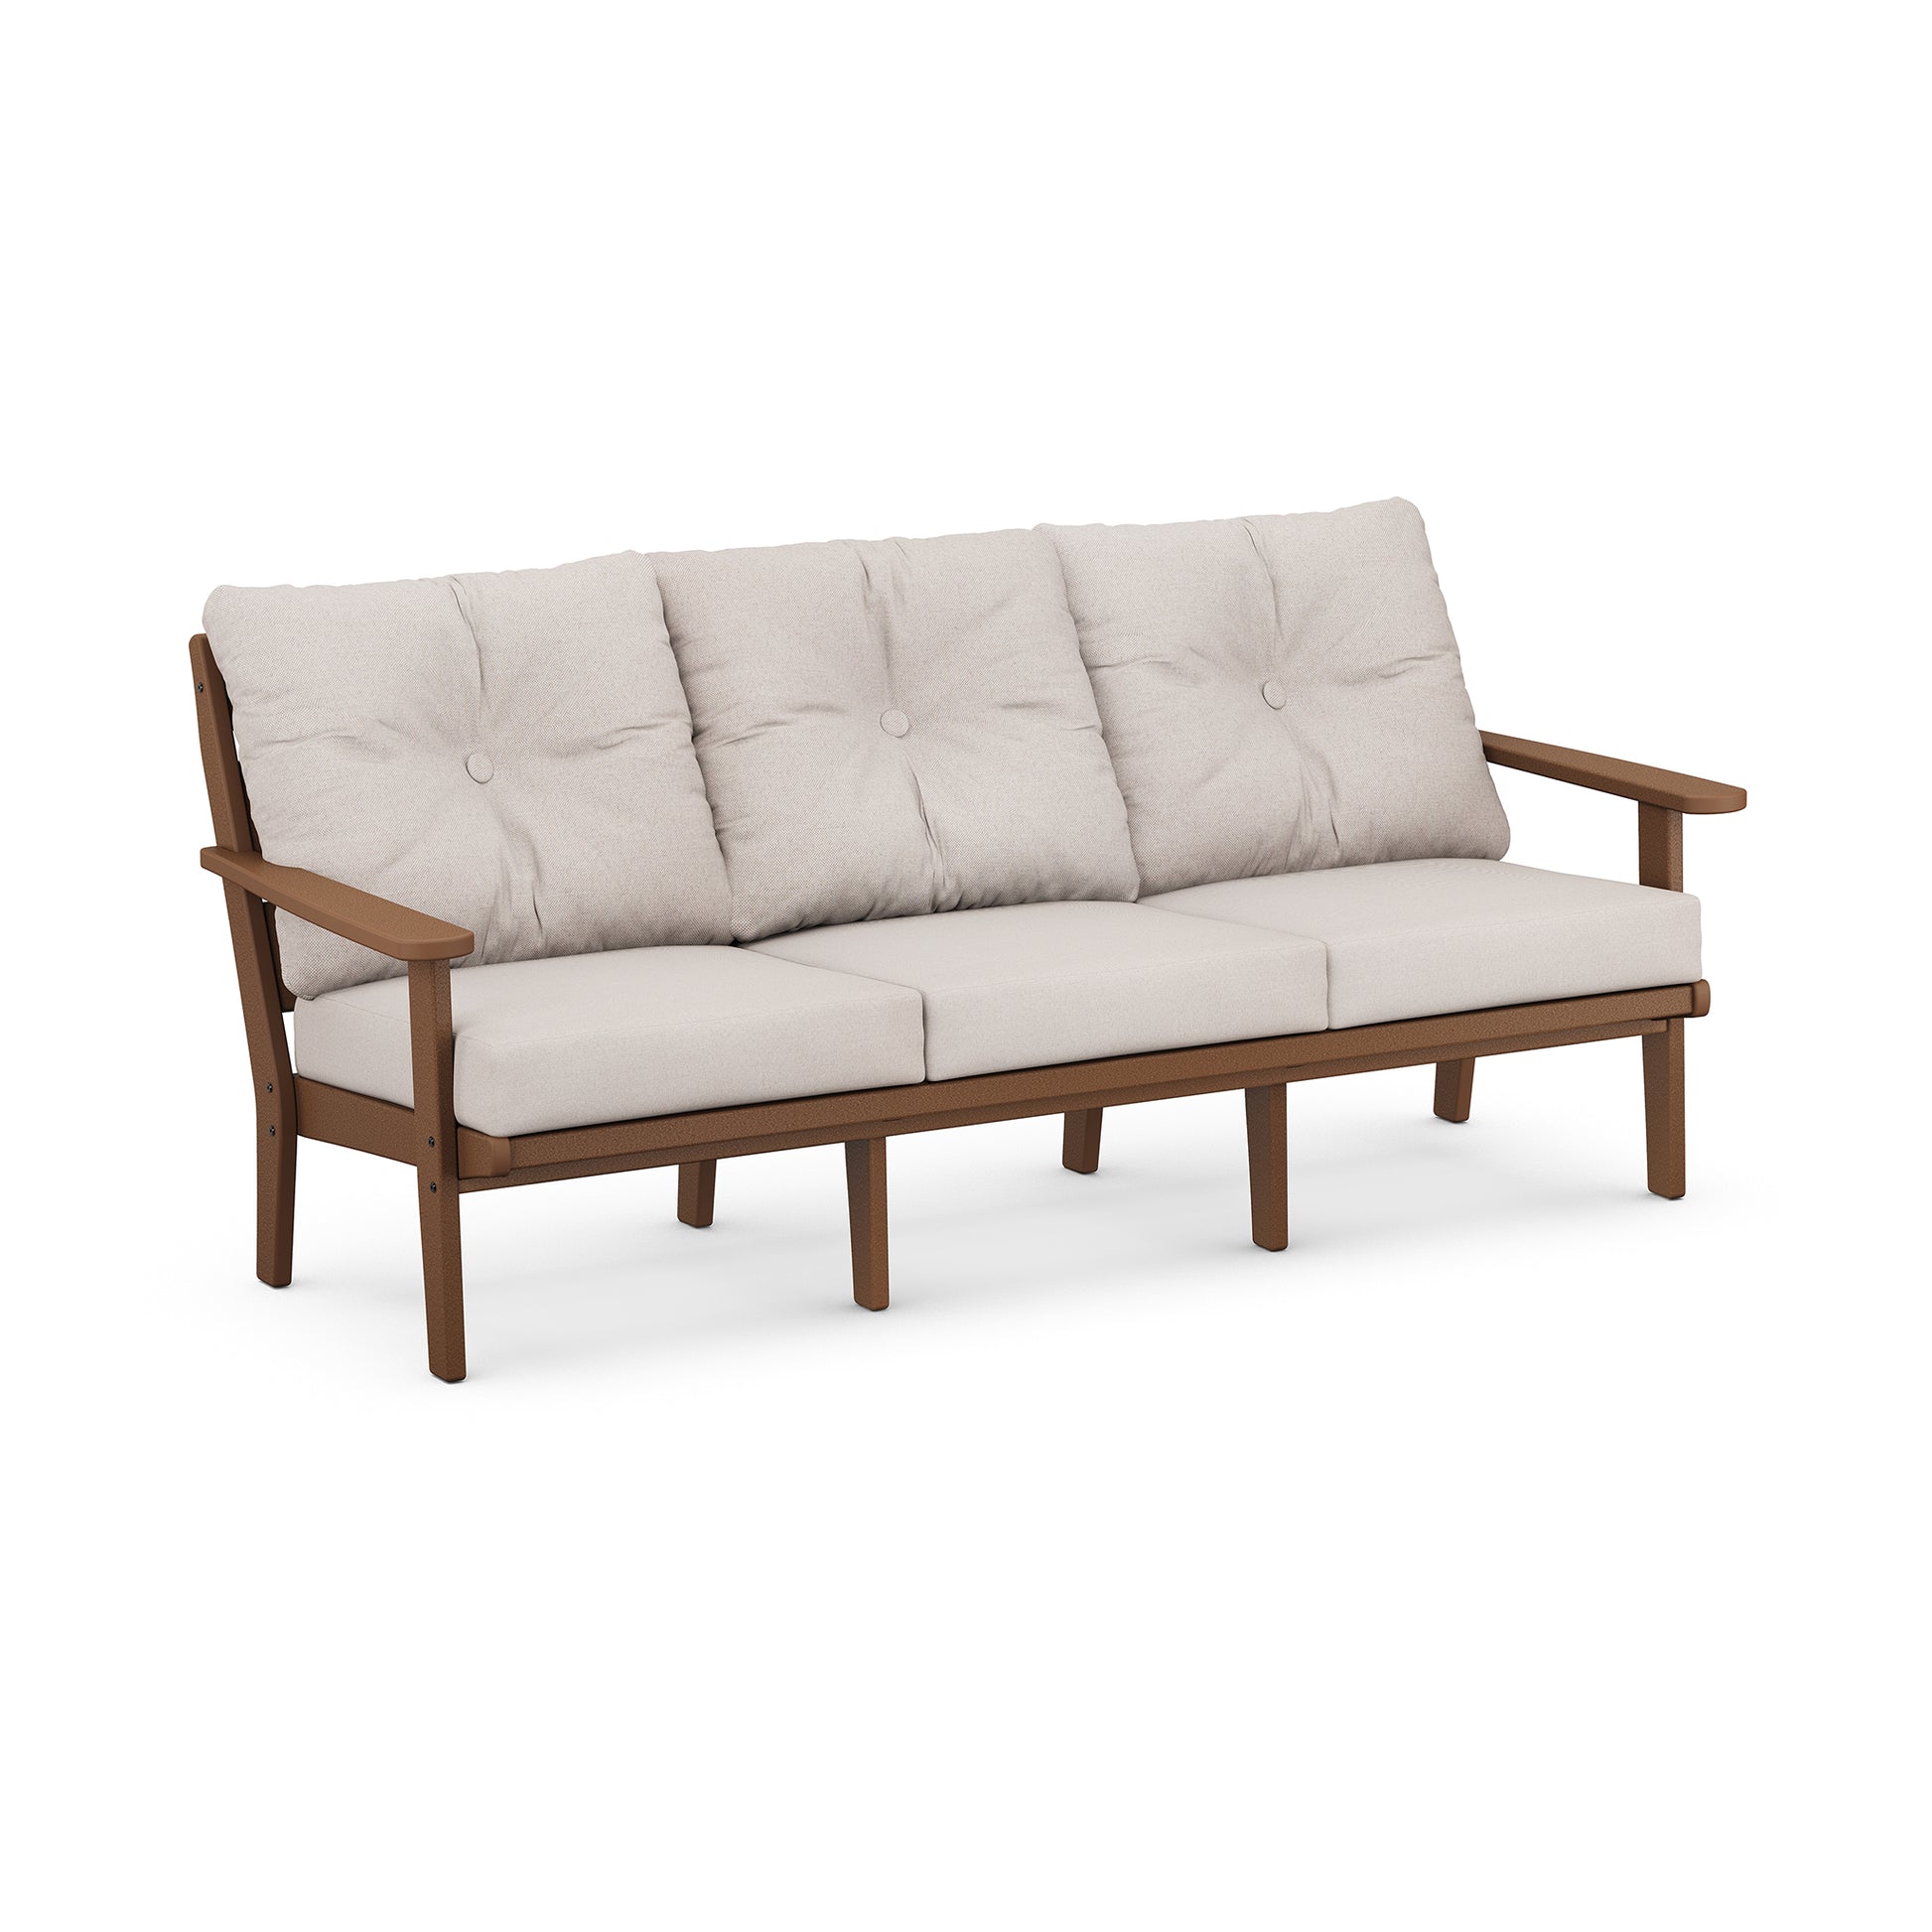 Three-seater outdoor sofa made from POLYWOOD® Lakeside Deep Seating Sofa lumber with a light beige cushion upholstered seat and backrest, featuring tufted details and a simple armrest design, isolated on a white